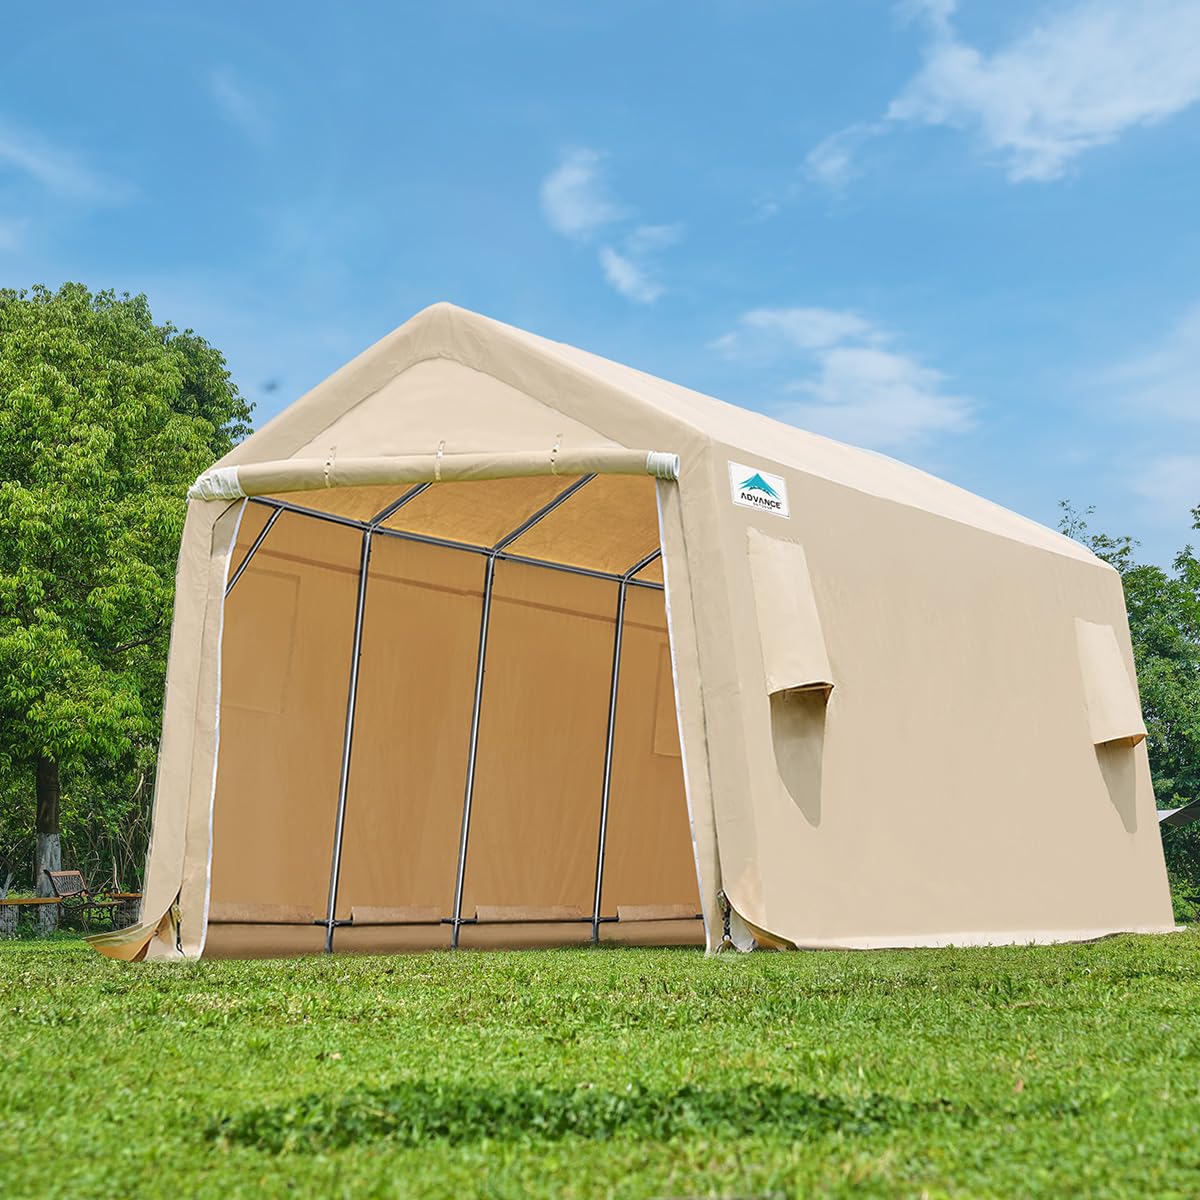 ADVANCE OUTDOOR 10X20 ft Carport Heavy Duty Outdoor Patio Anti-Snow Portable Canopy Storage Shelter Shed with 2 Rolled up Zipper Doors & Vents for Snowmobile Garden Tools, Beige (8808BY-3) 10'x20'